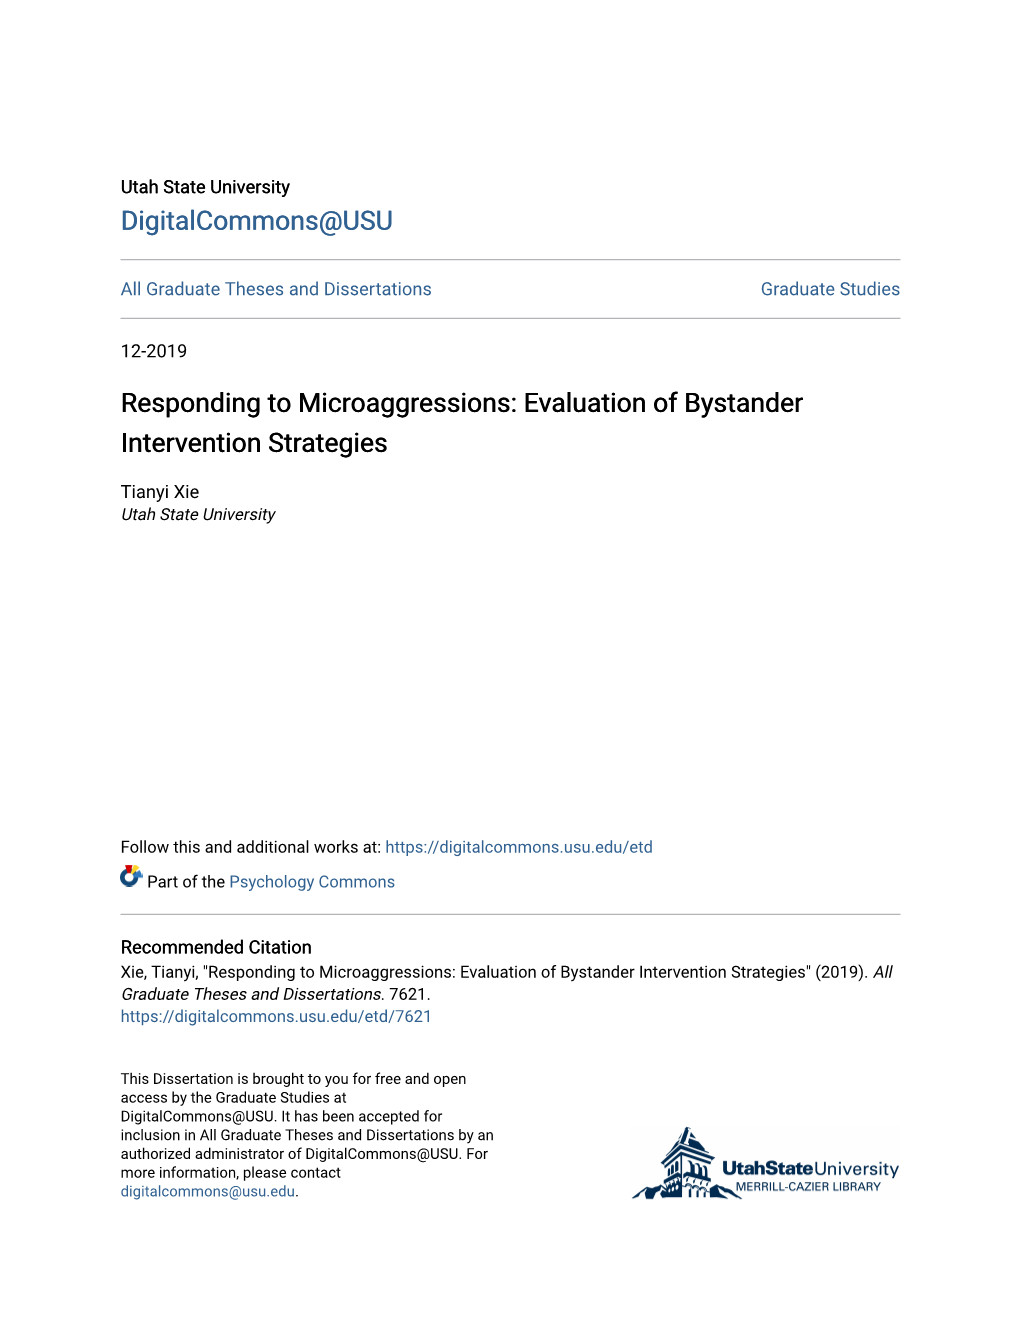 Responding to Microaggressions: Evaluation of Bystander Intervention Strategies